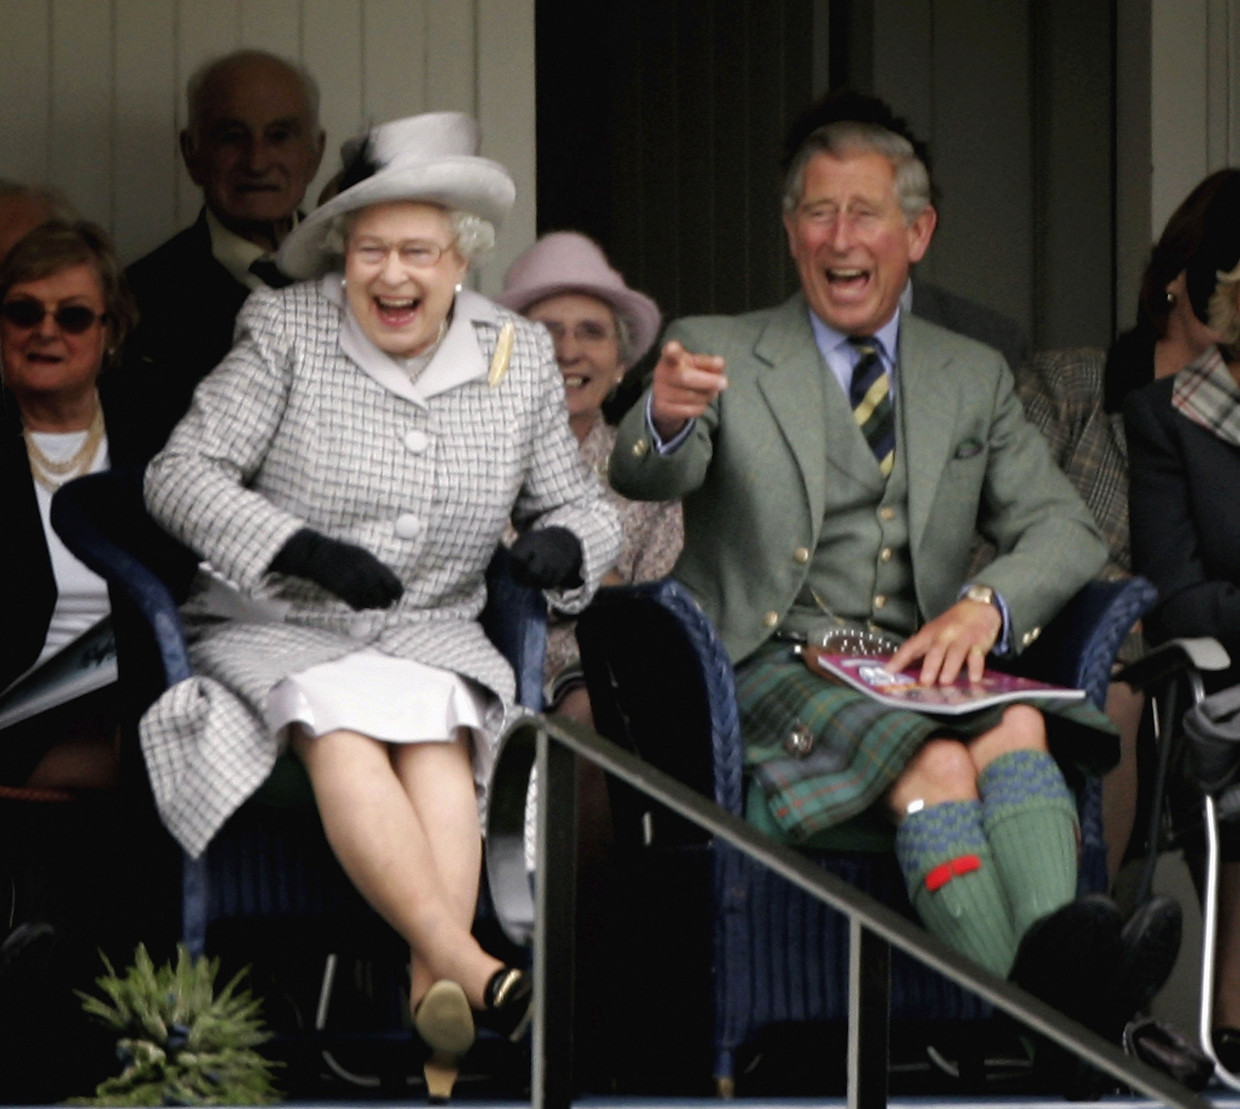 BRAEMAR, UNITED KINGDOM - SEPTEMBER 02: Queen Elizabeth II and  Prince Charles, The Prince of Wales laugh as they watch competitors during the Braemar Gathering at the Princess Royal and Duke of Fife Memorial Park on September 2, 2006 in Braemar, Scotland. Large crowds attend each year to acclaim their monarch and Chieftain of the Braemar Gathering. There have been gatherings of one sort or another at Bremar for the last nine hundred years.  (Photo by Chris Jackson/Getty Images) Beeld Getty Images